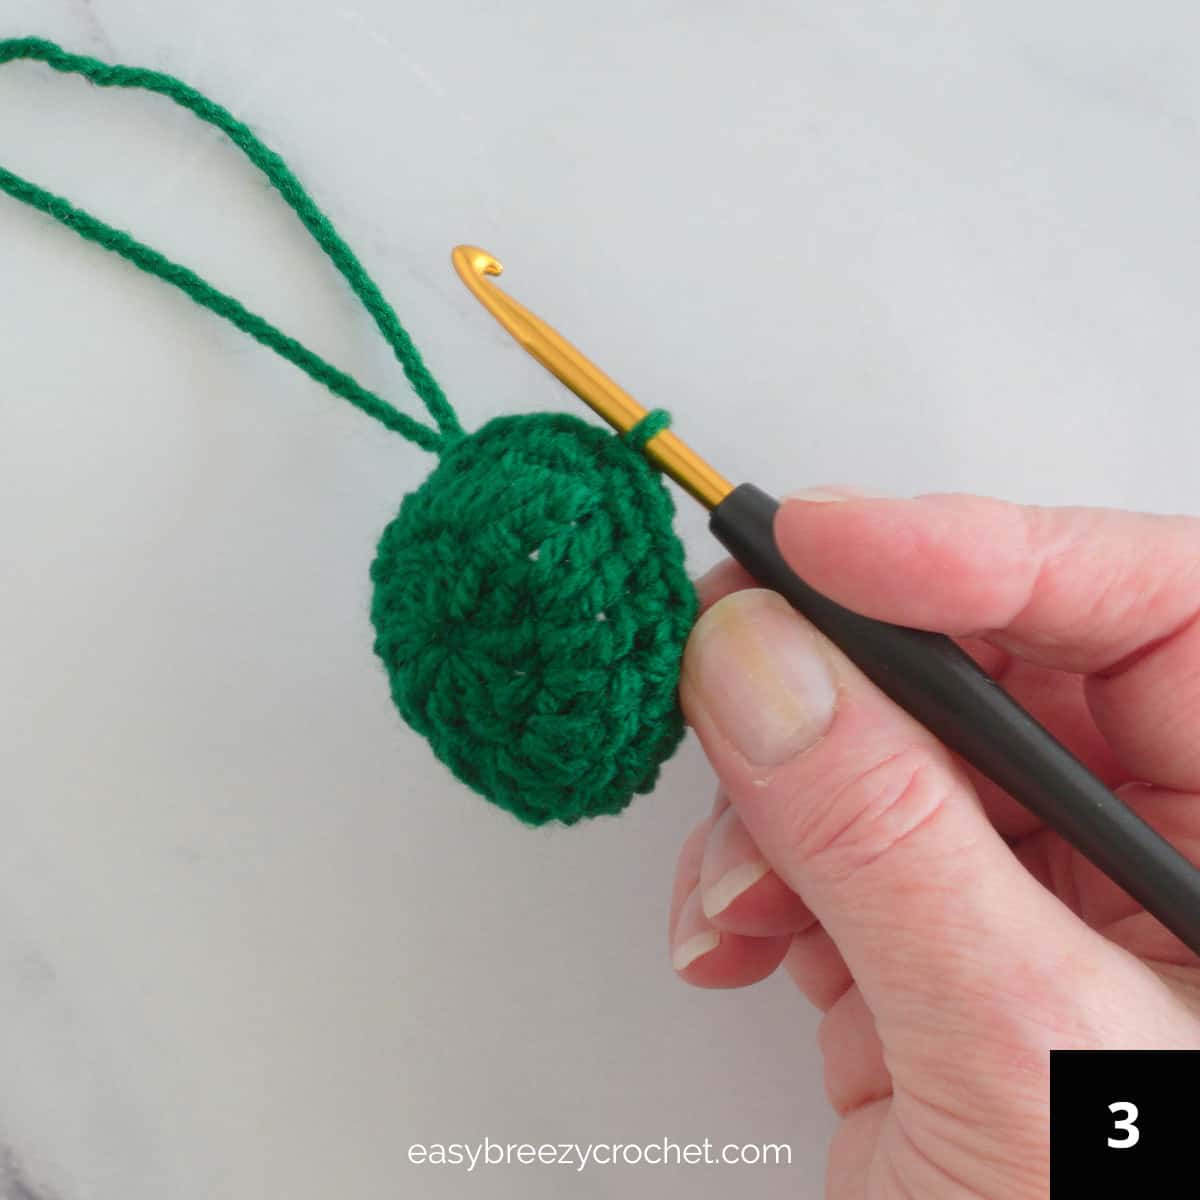 A hand holding a crochet hook and a green crocheted circle.